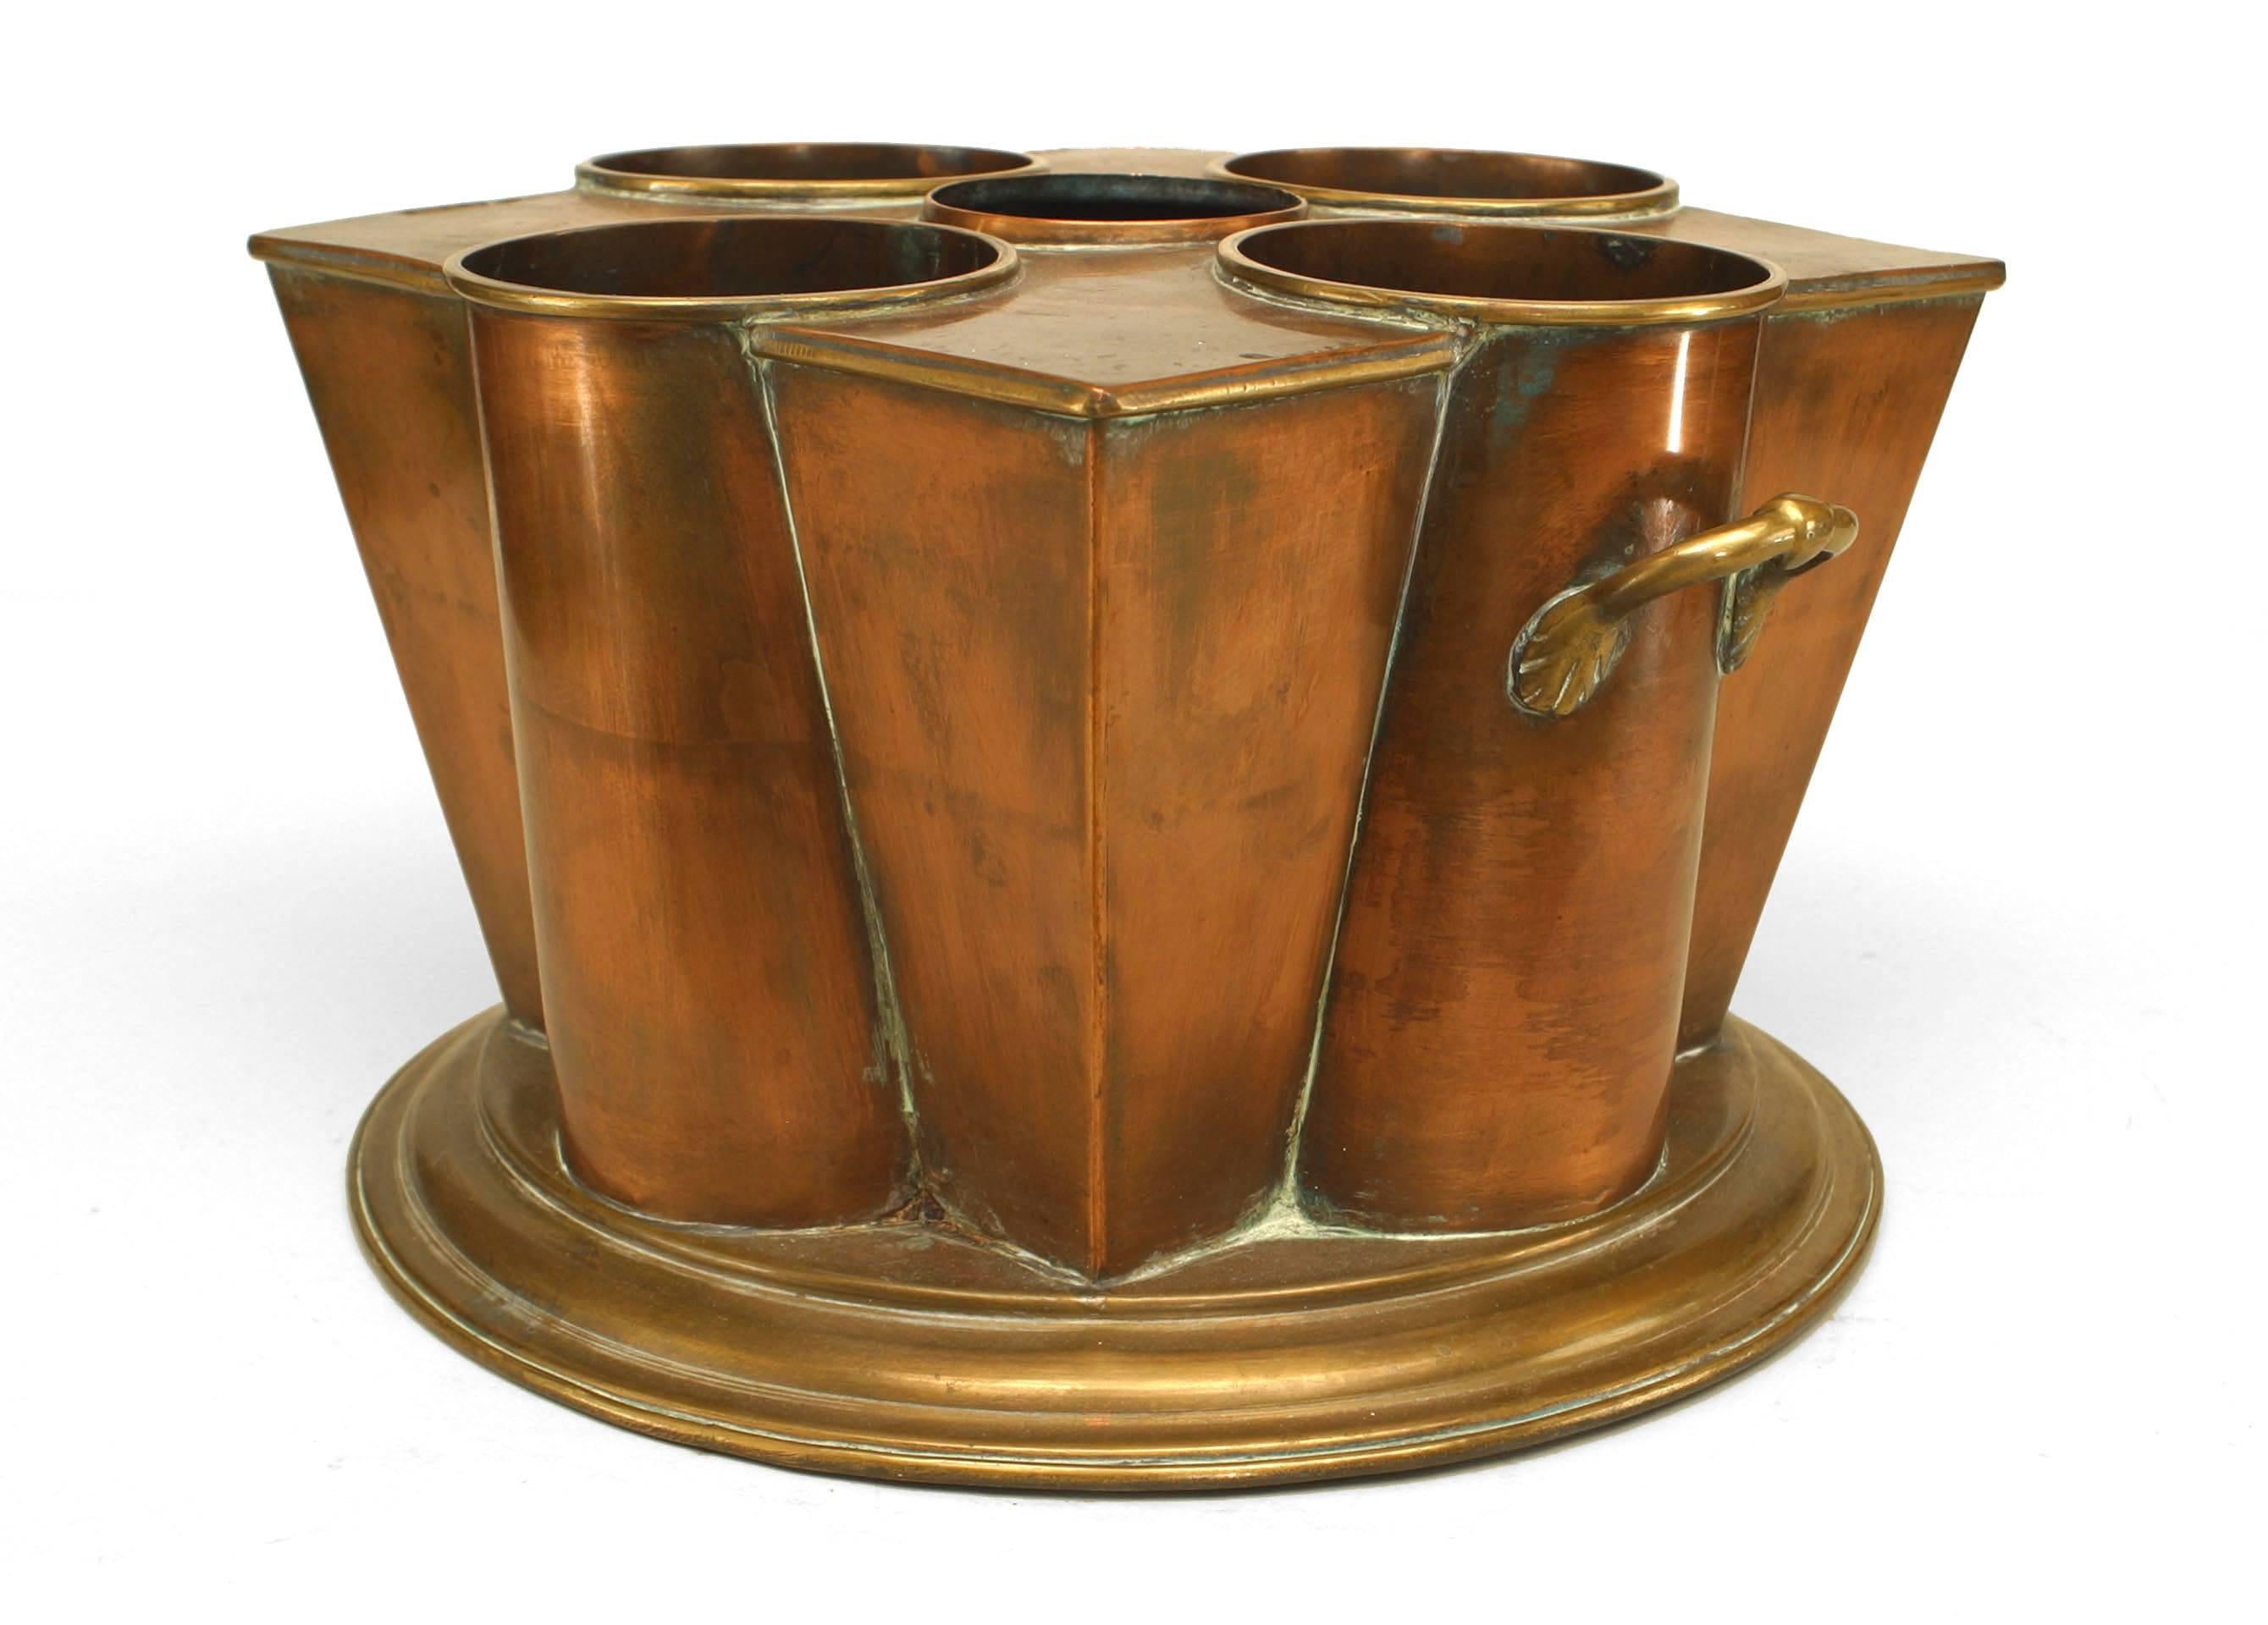 English Art Deco square tapered copper & brass wine cooler with a 4 wells centering an opening with a cover flanked by side ring handles.
